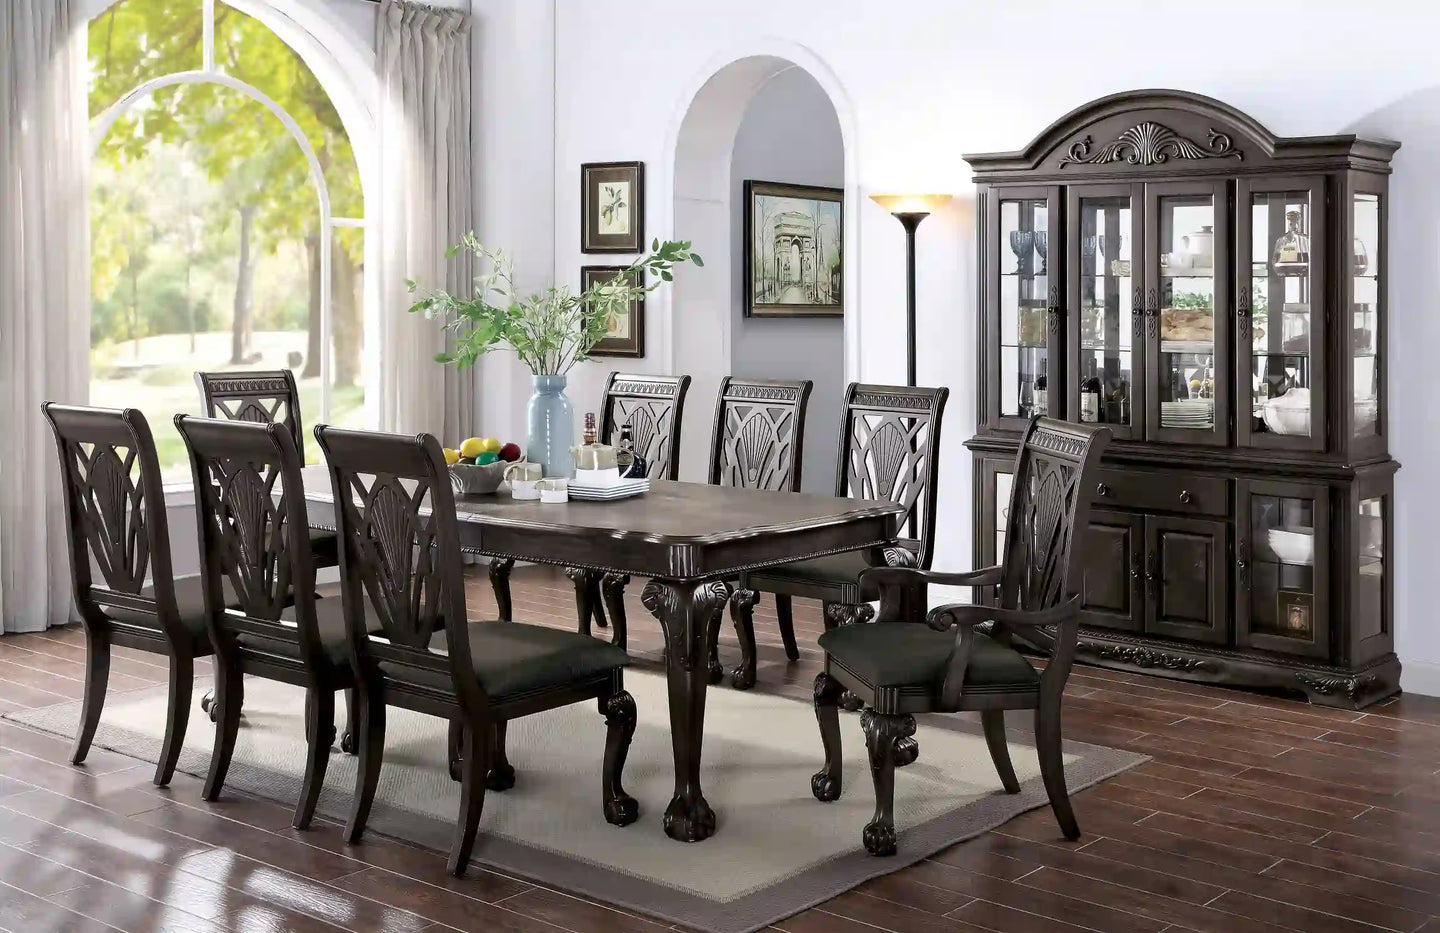 Furniture of America Nuna Traditional Extendable Dining Table - IDF-3185DG-T